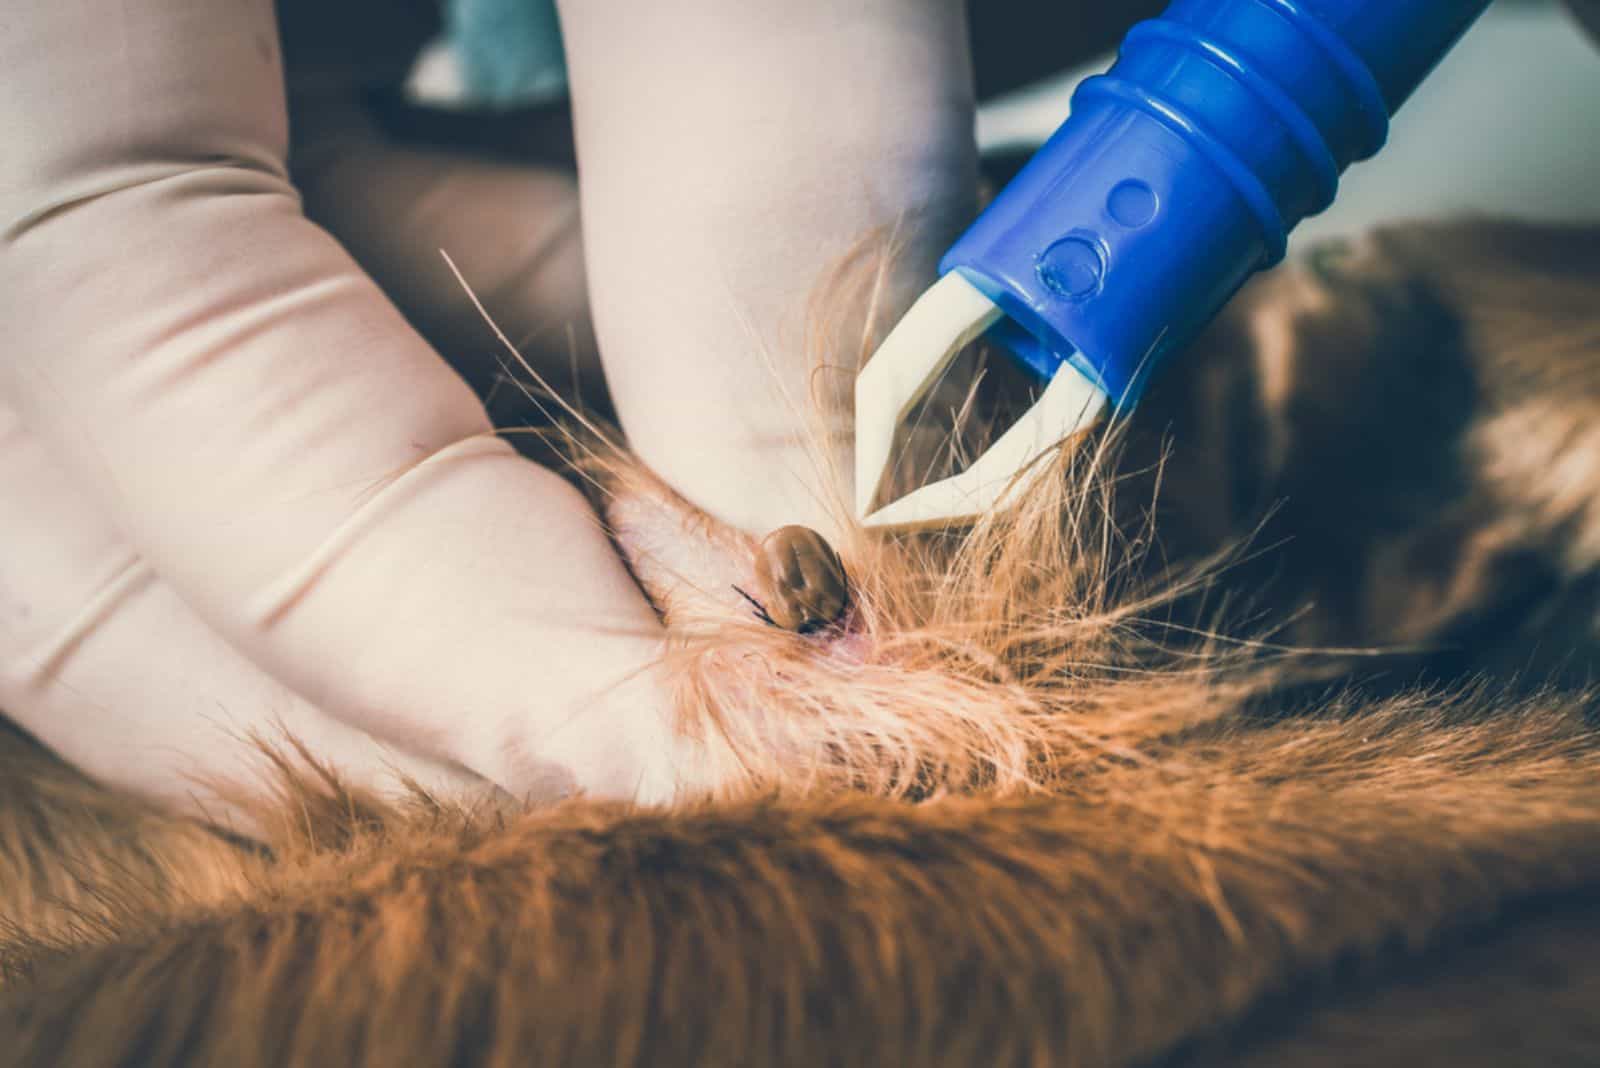 veterinarian doctor removing a tick from a dog